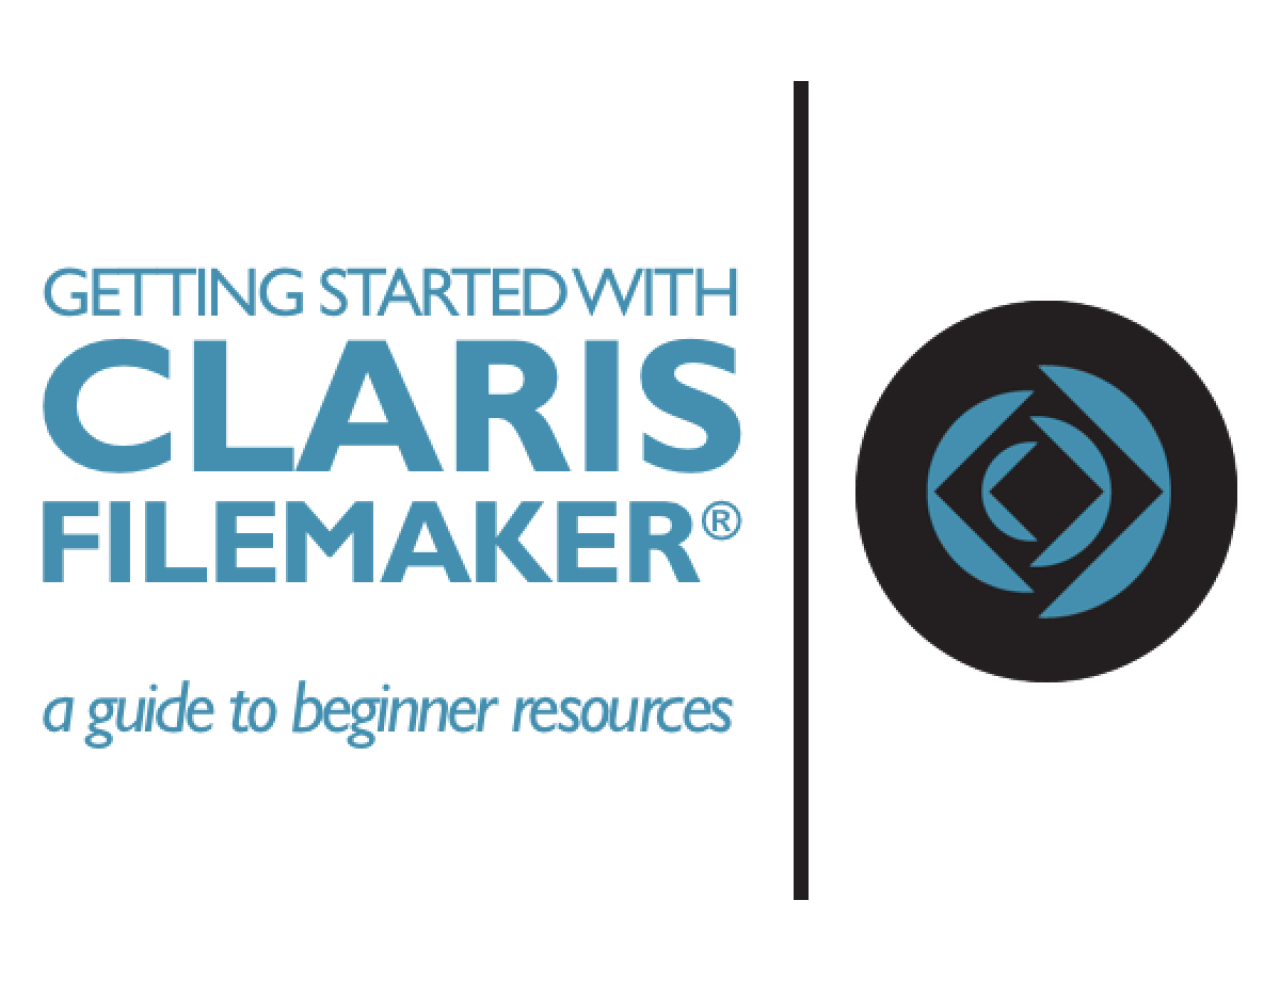 Getting Started with Claris FileMaker: A Guide to Beginner Resources next to the claris logo.